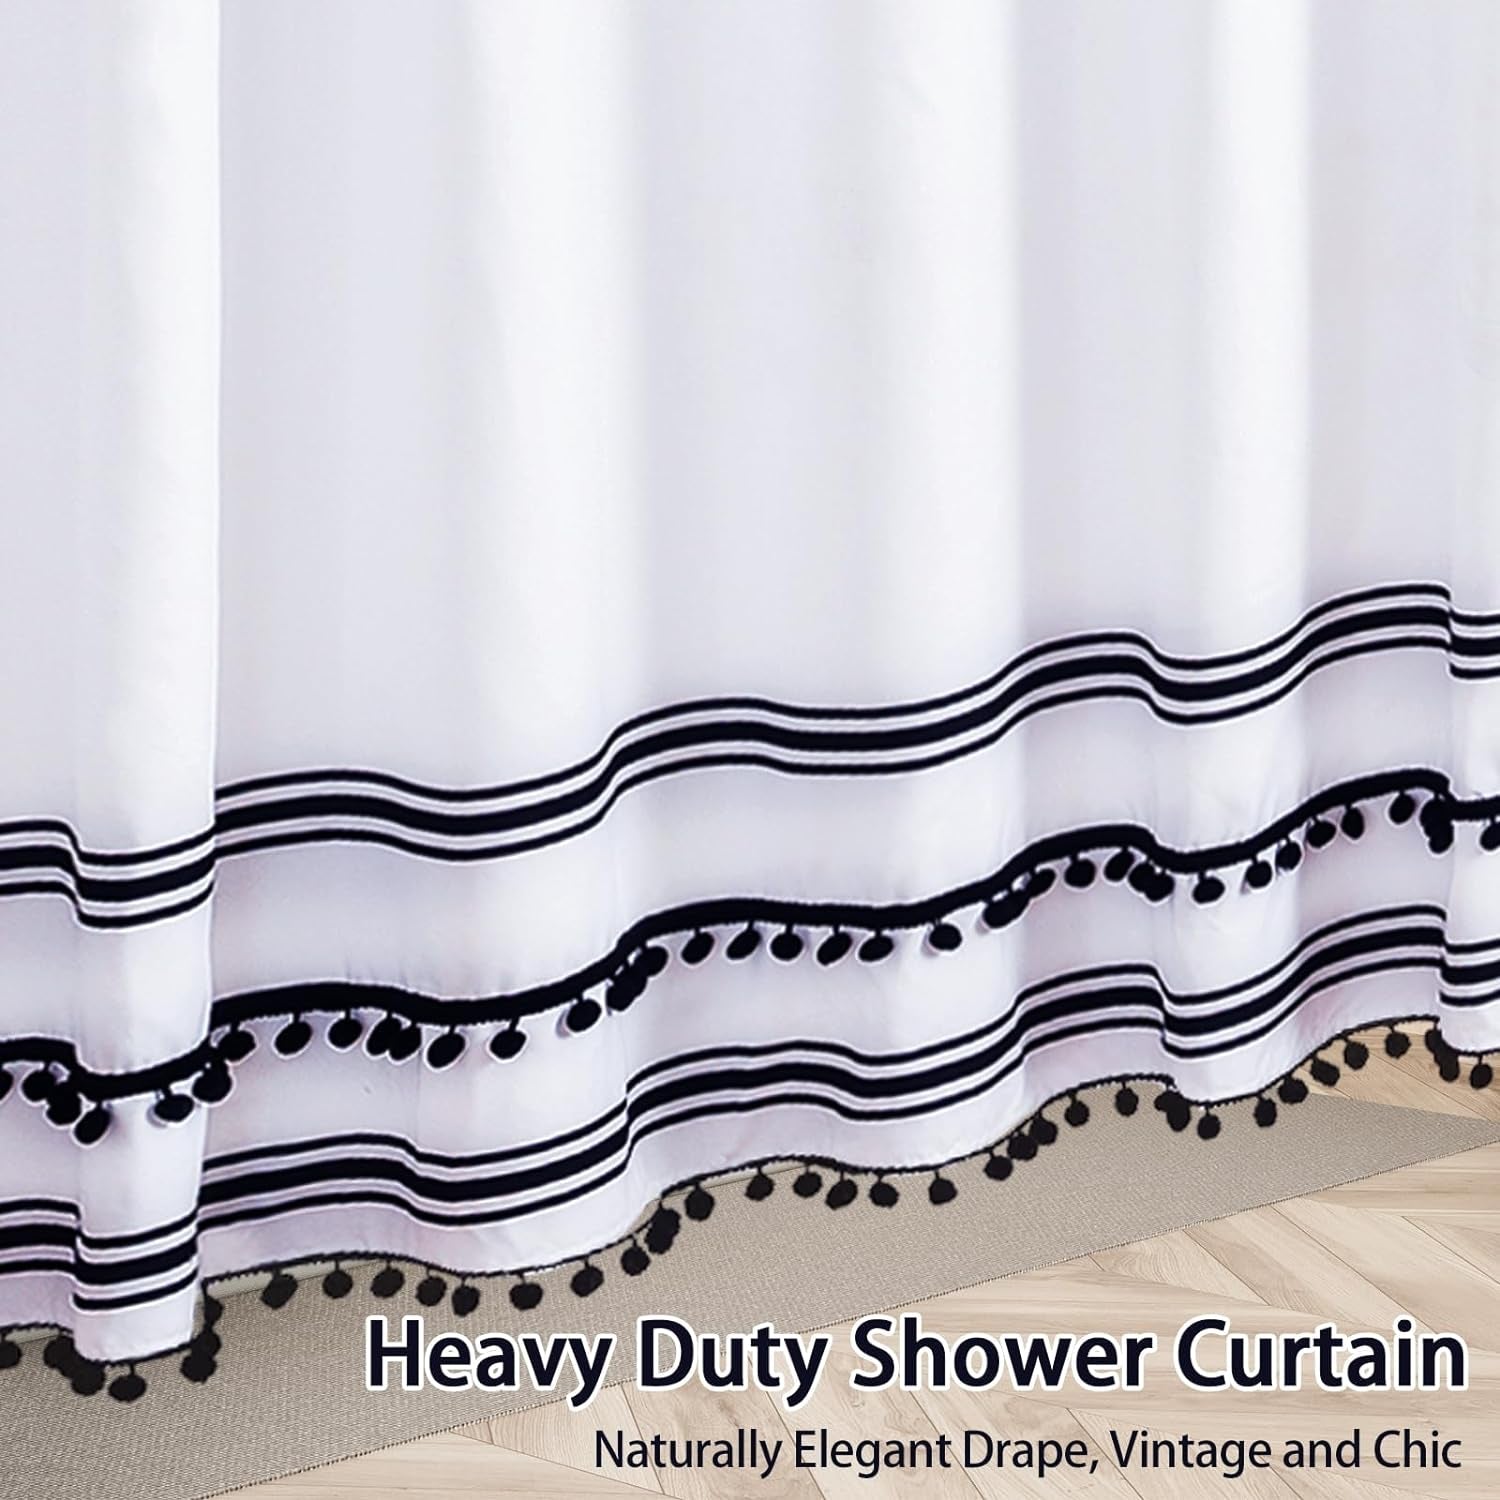 72"X72" Black and White Shower Curtain Sets with Boho Tassel Pendants Modern Black Striped Farmhouse Shower Curtain for Bathroom Waterproof Ployester 12 Hooks Home Decorations